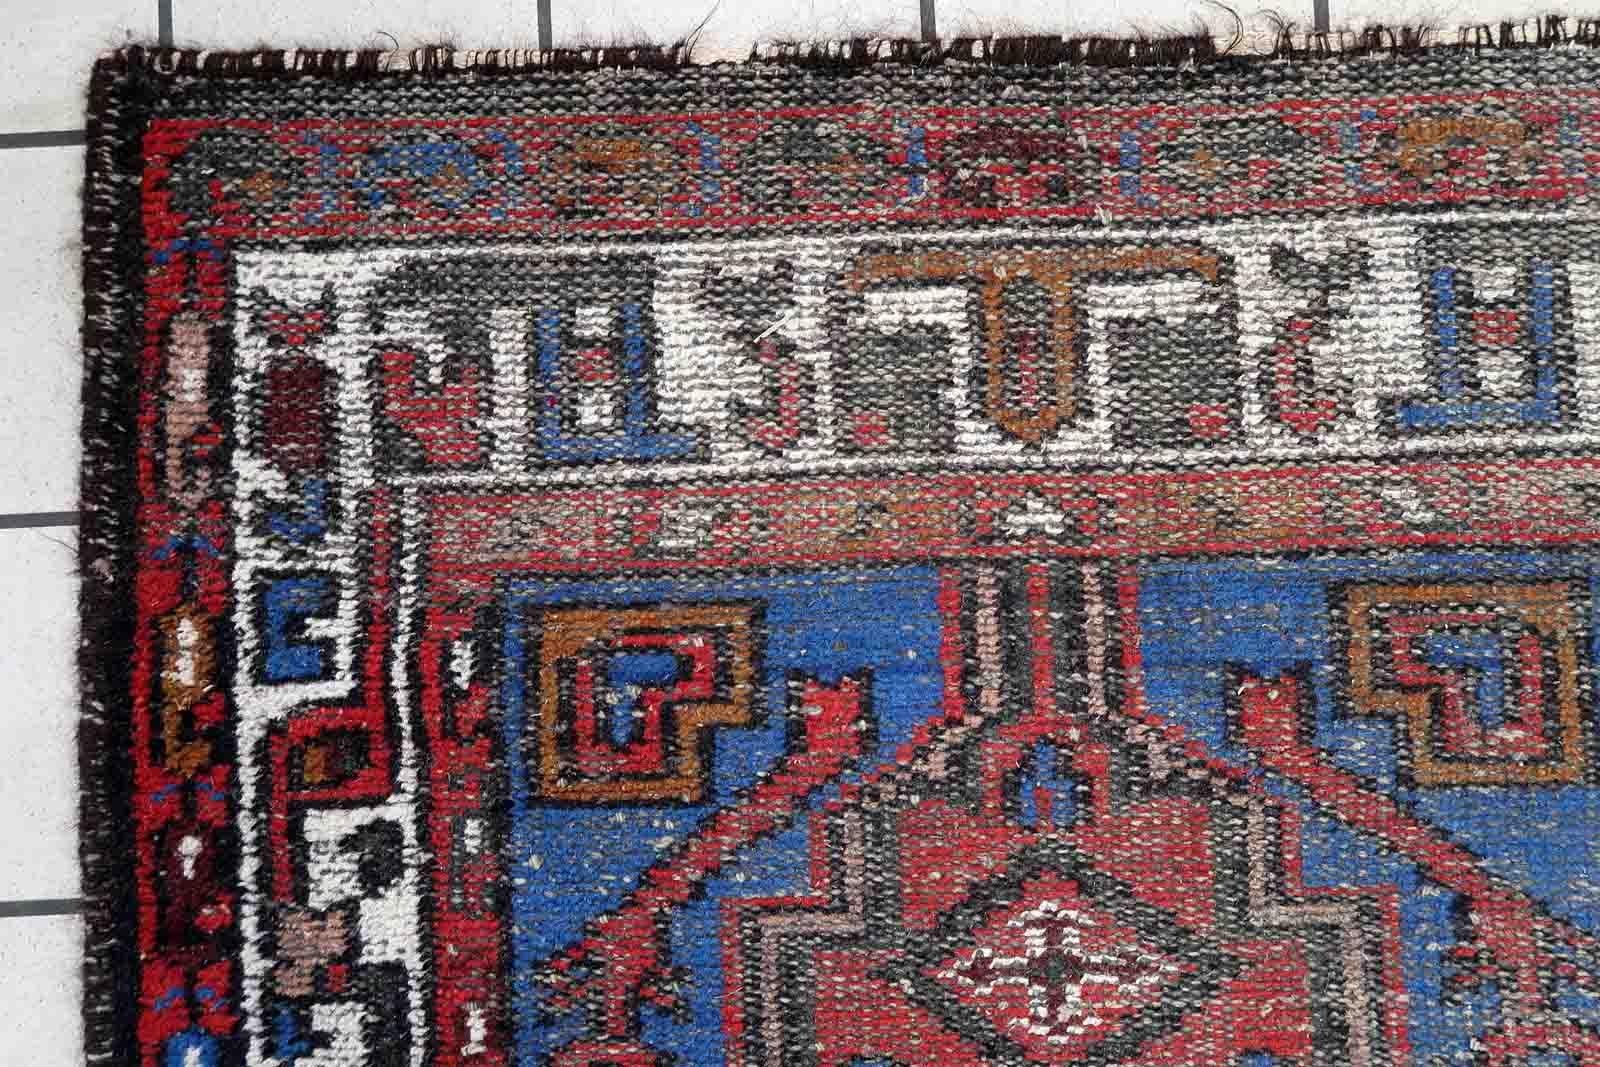 Handmade vintage Hamadan rug in geometric design with large medallion. The rug is from the end of 20th century in distressed condition.

-condition: distressed,

-circa: 1970s,

-size: 3.3' x 6.4' (101cm x 197cm),

-material: